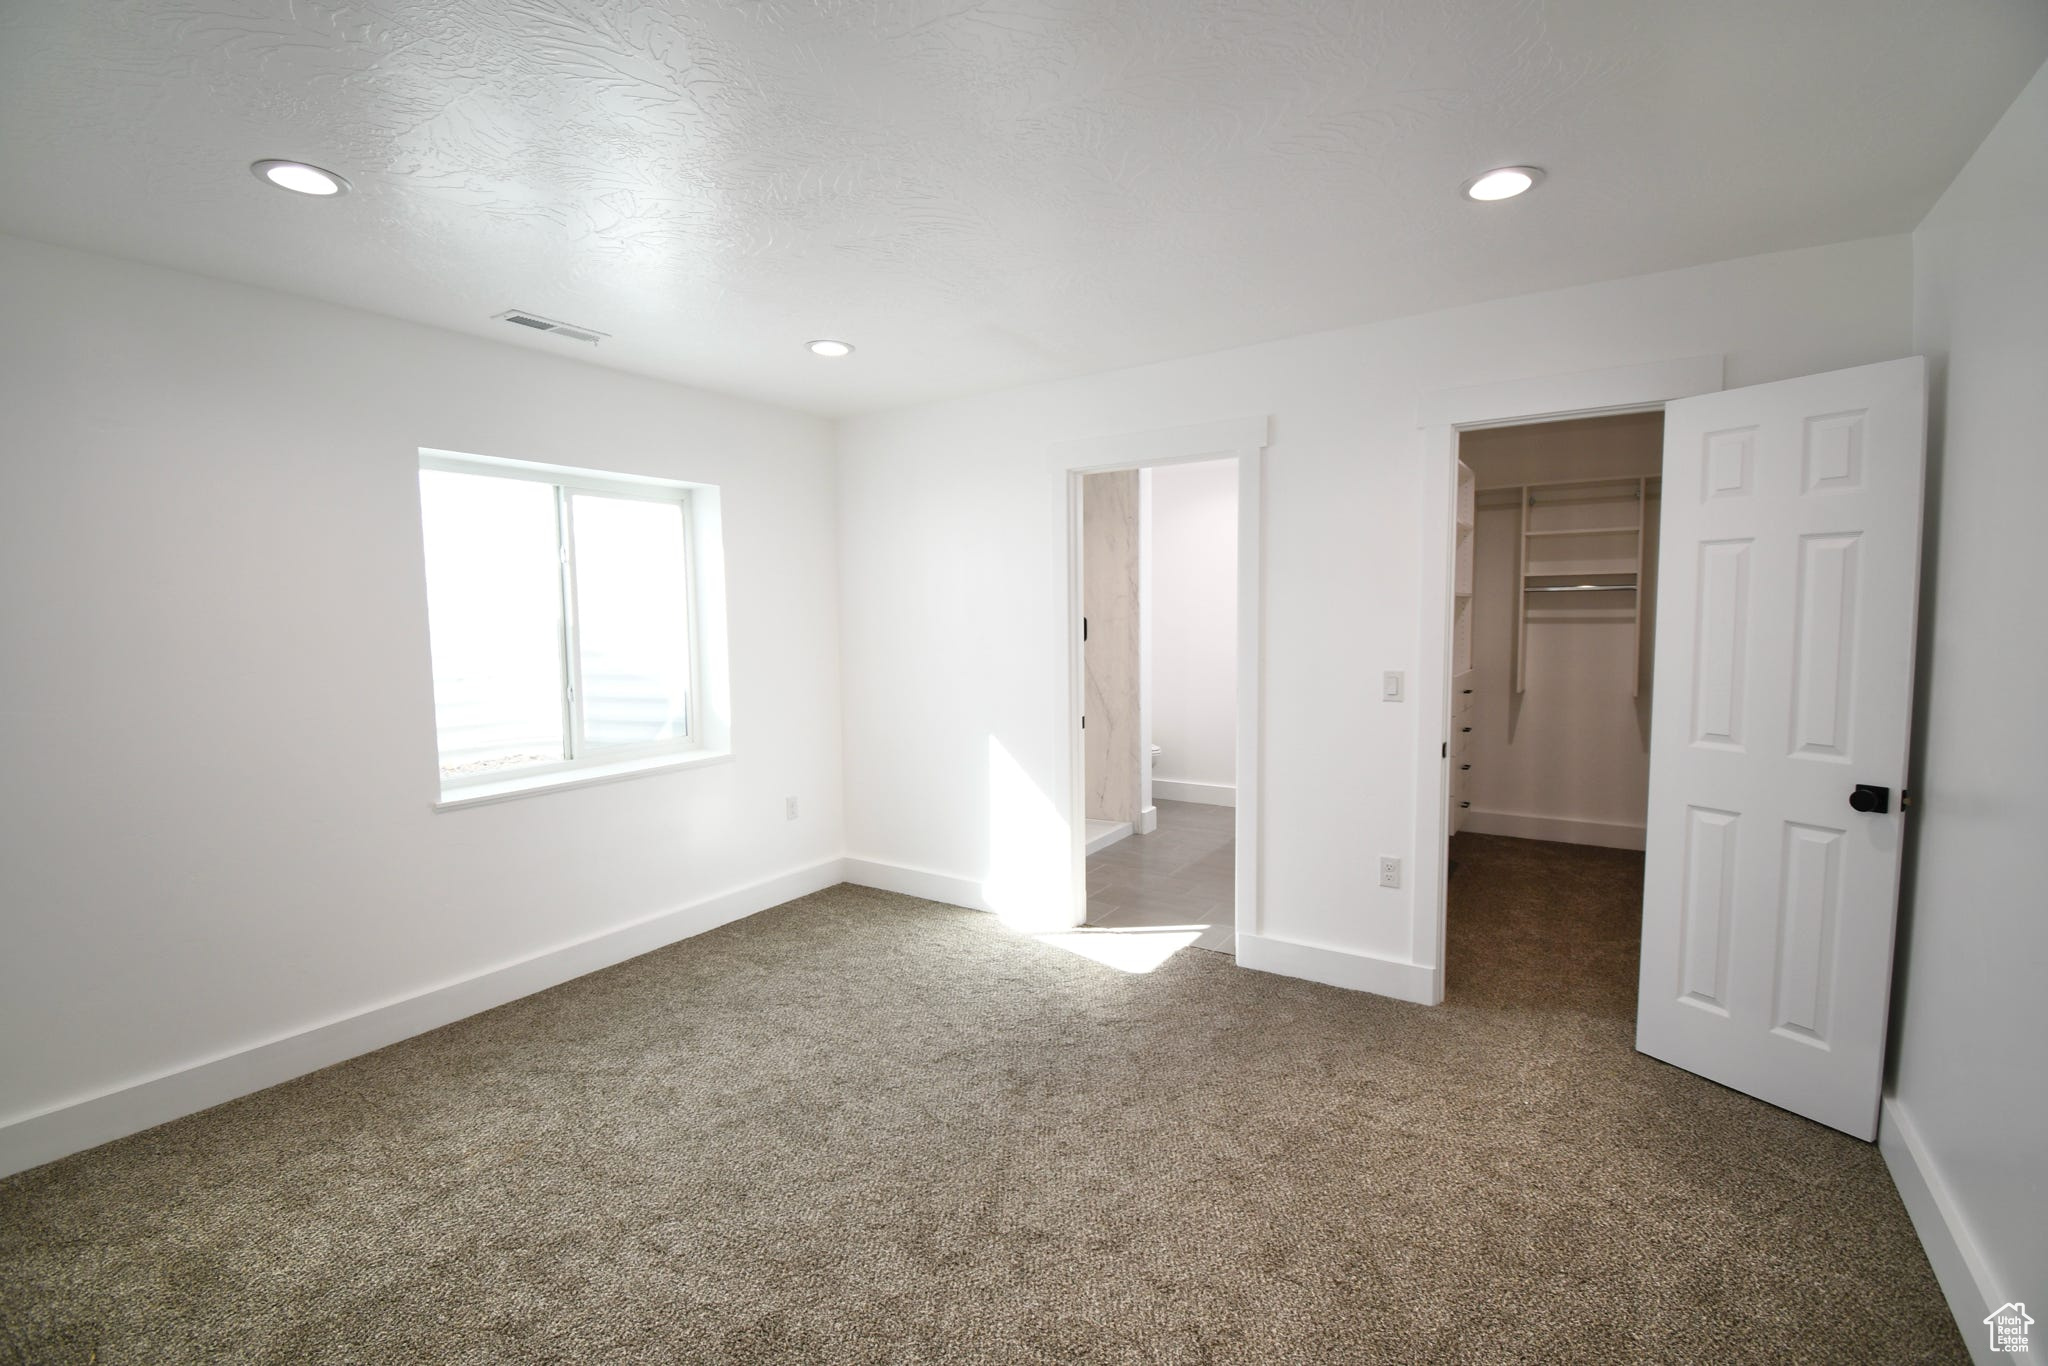 Unfurnished bedroom featuring a spacious closet, a closet, and dark carpet